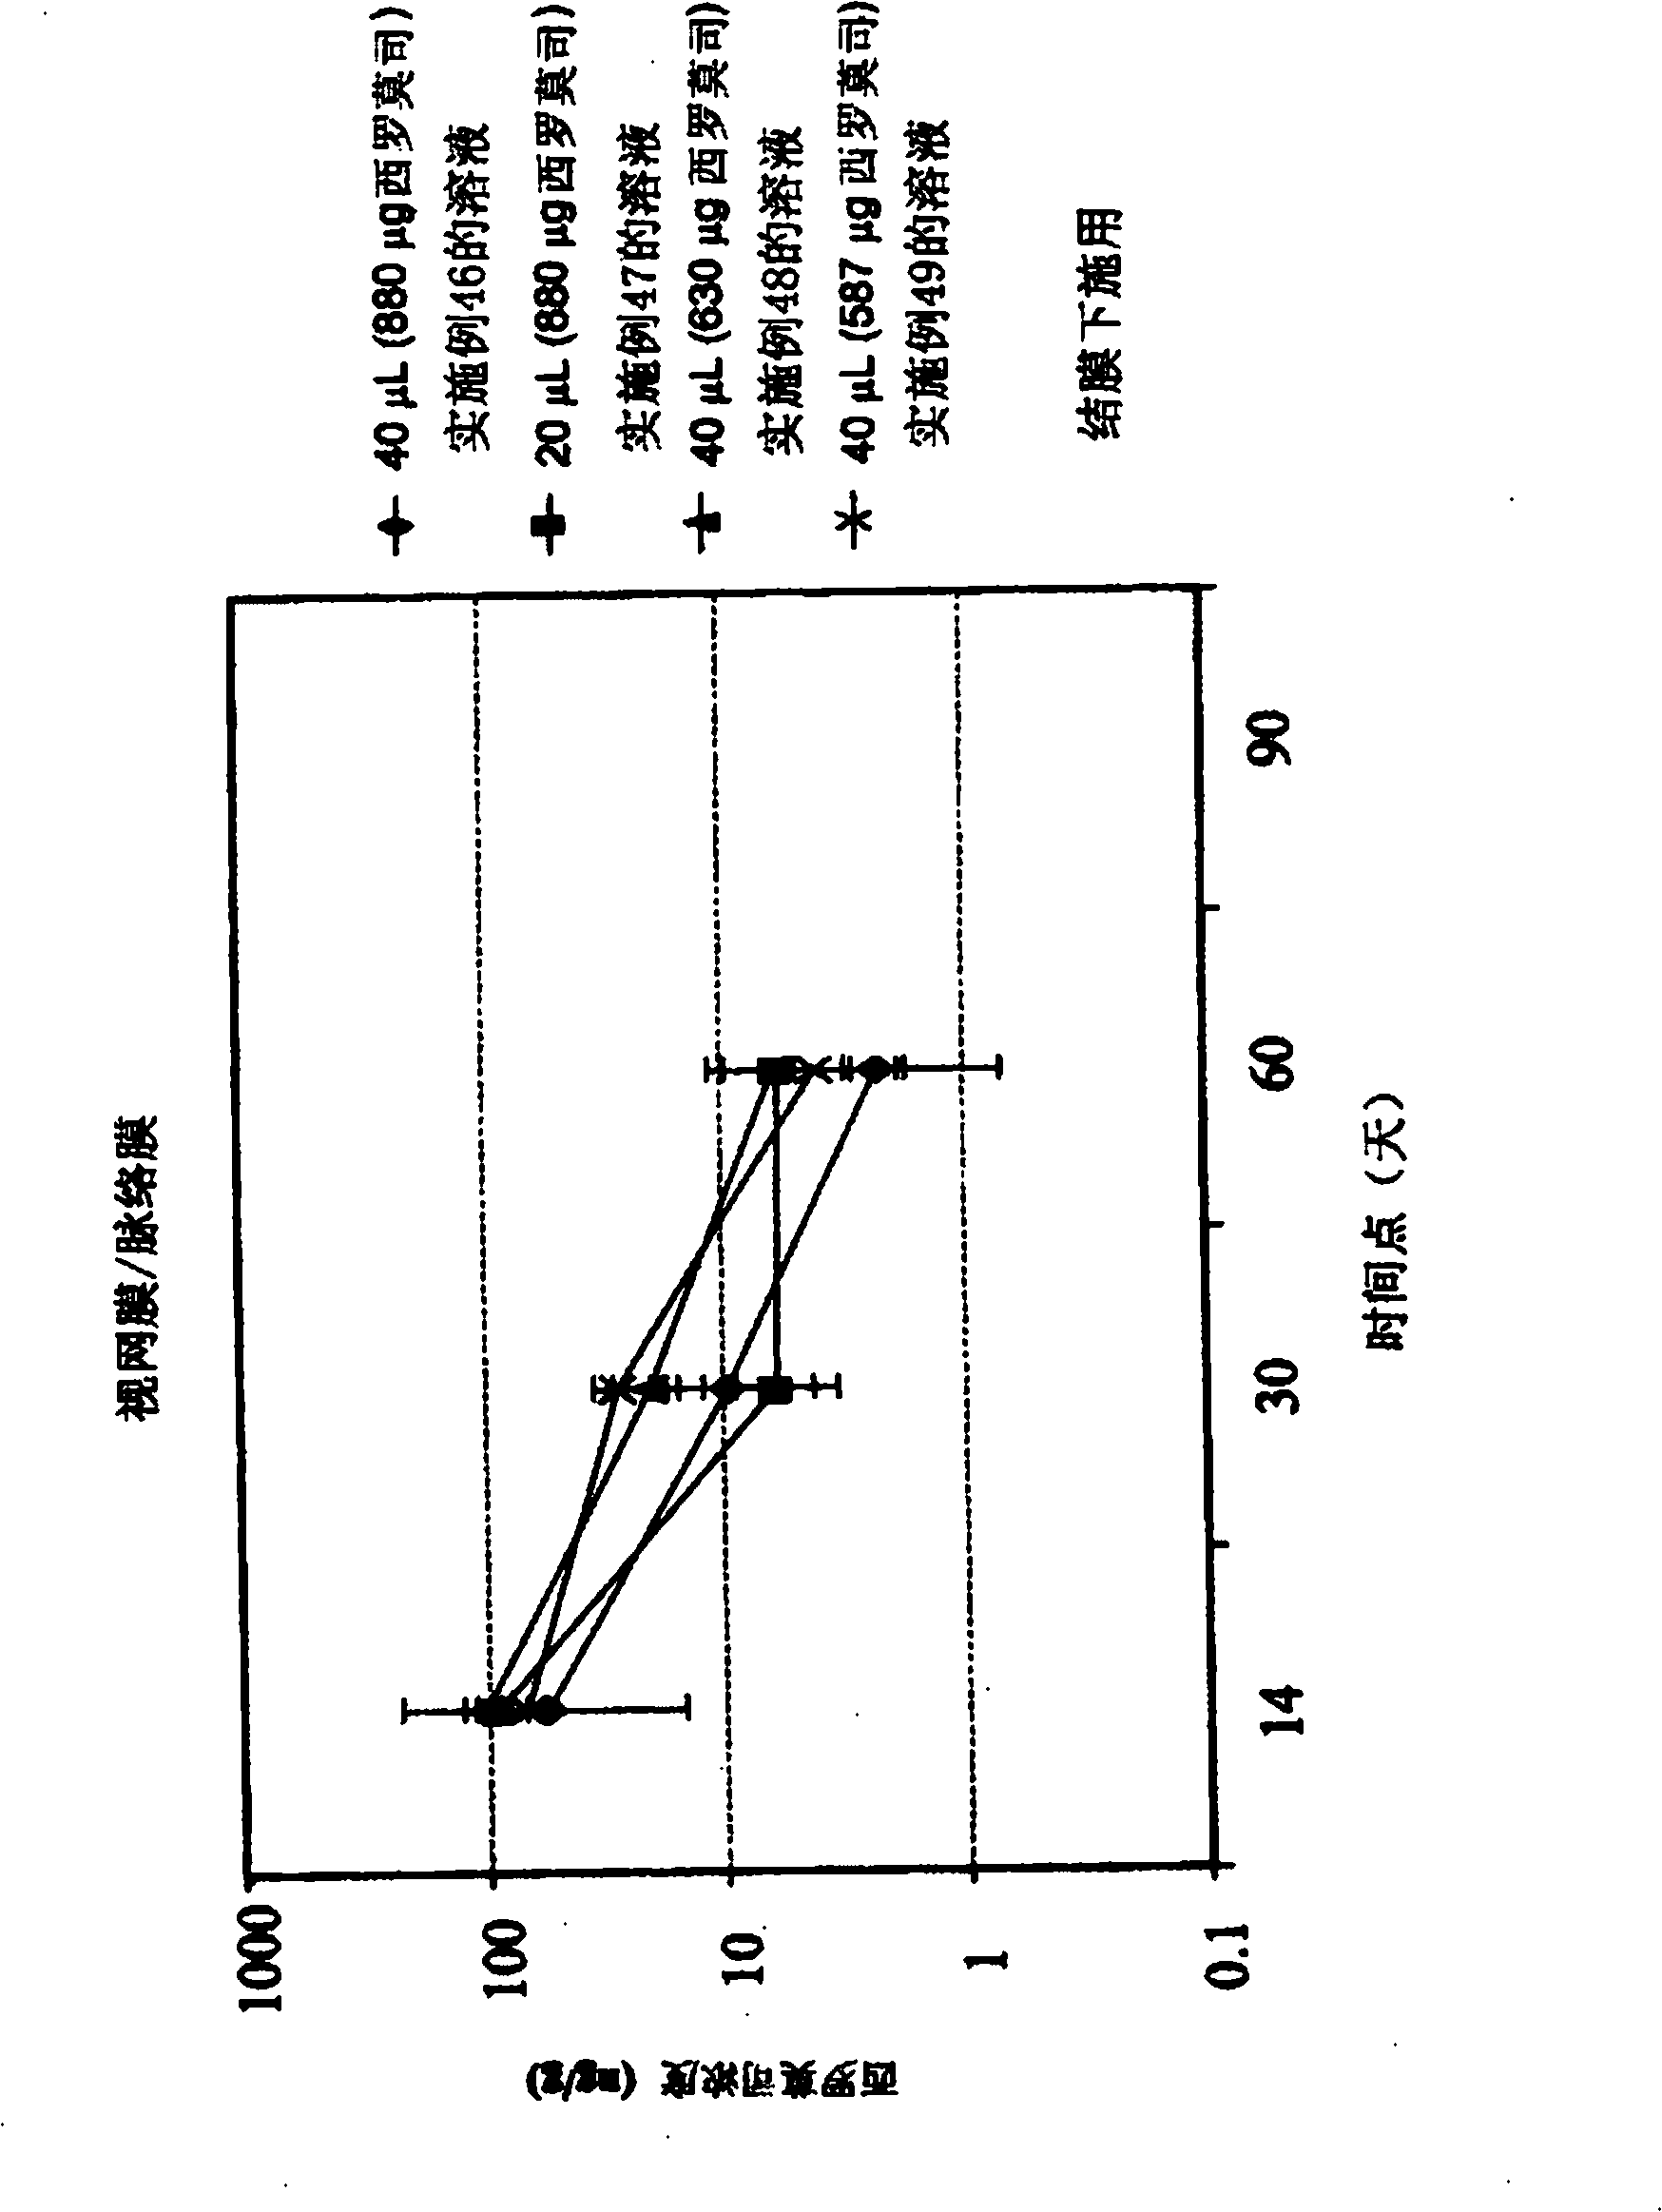 Formulations for treatment of ocular diseases or conditions